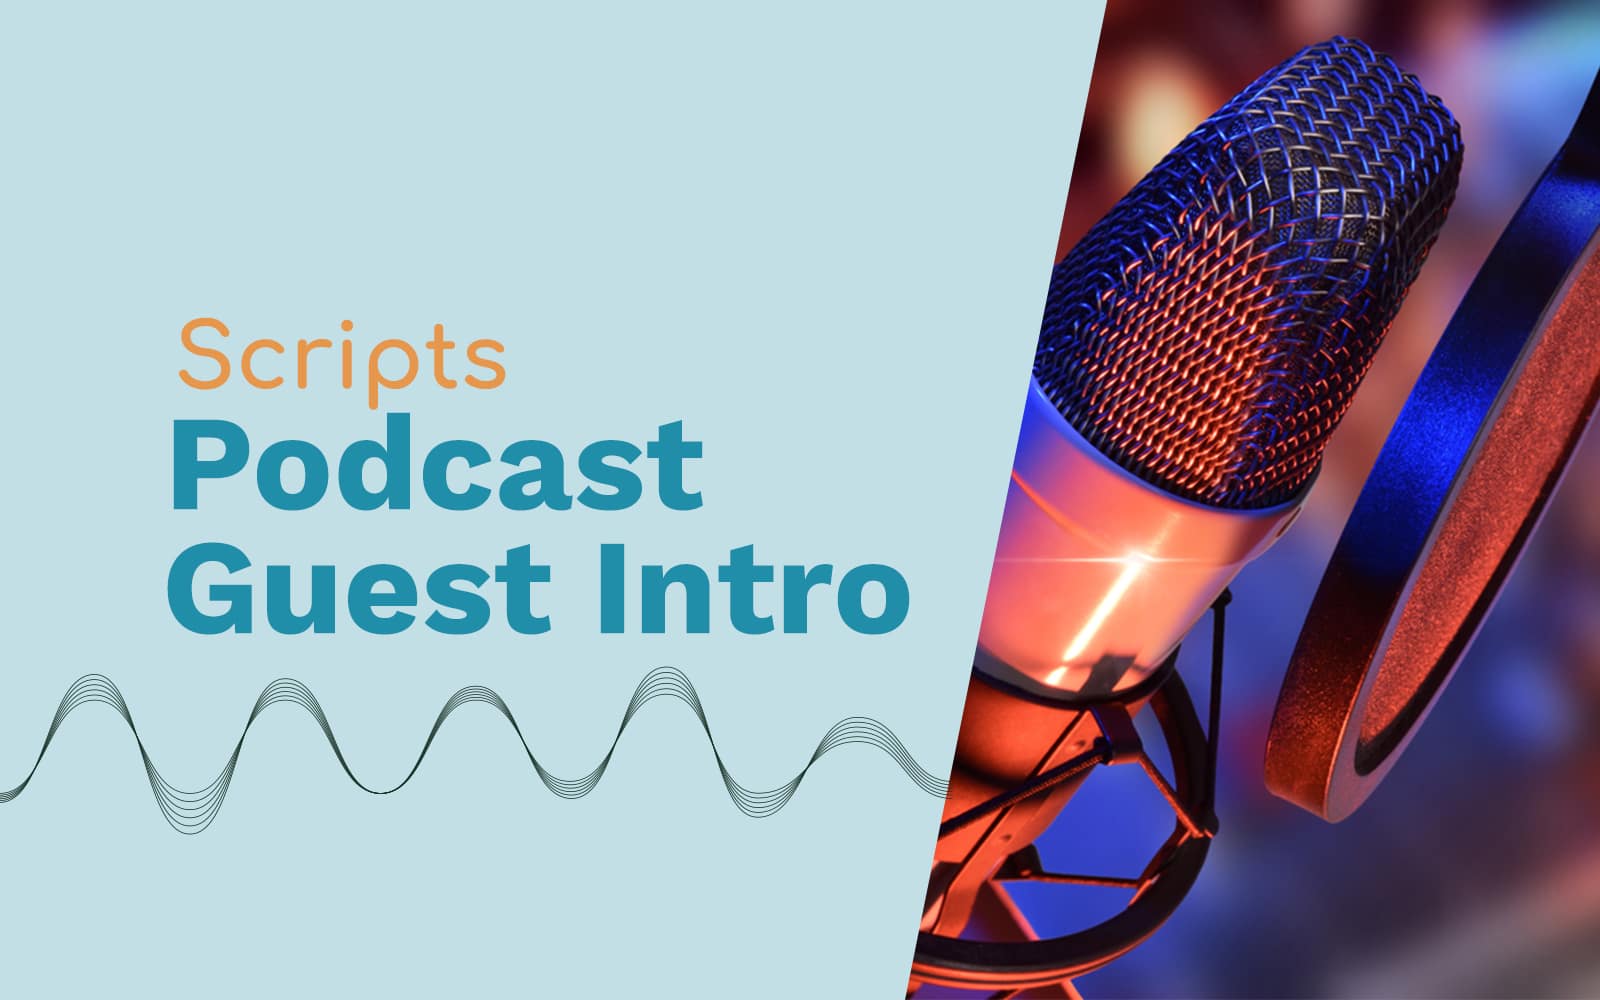 Scripts to Introduce Your Podcast Guest Podcasting podcast guest Music Radio Creative